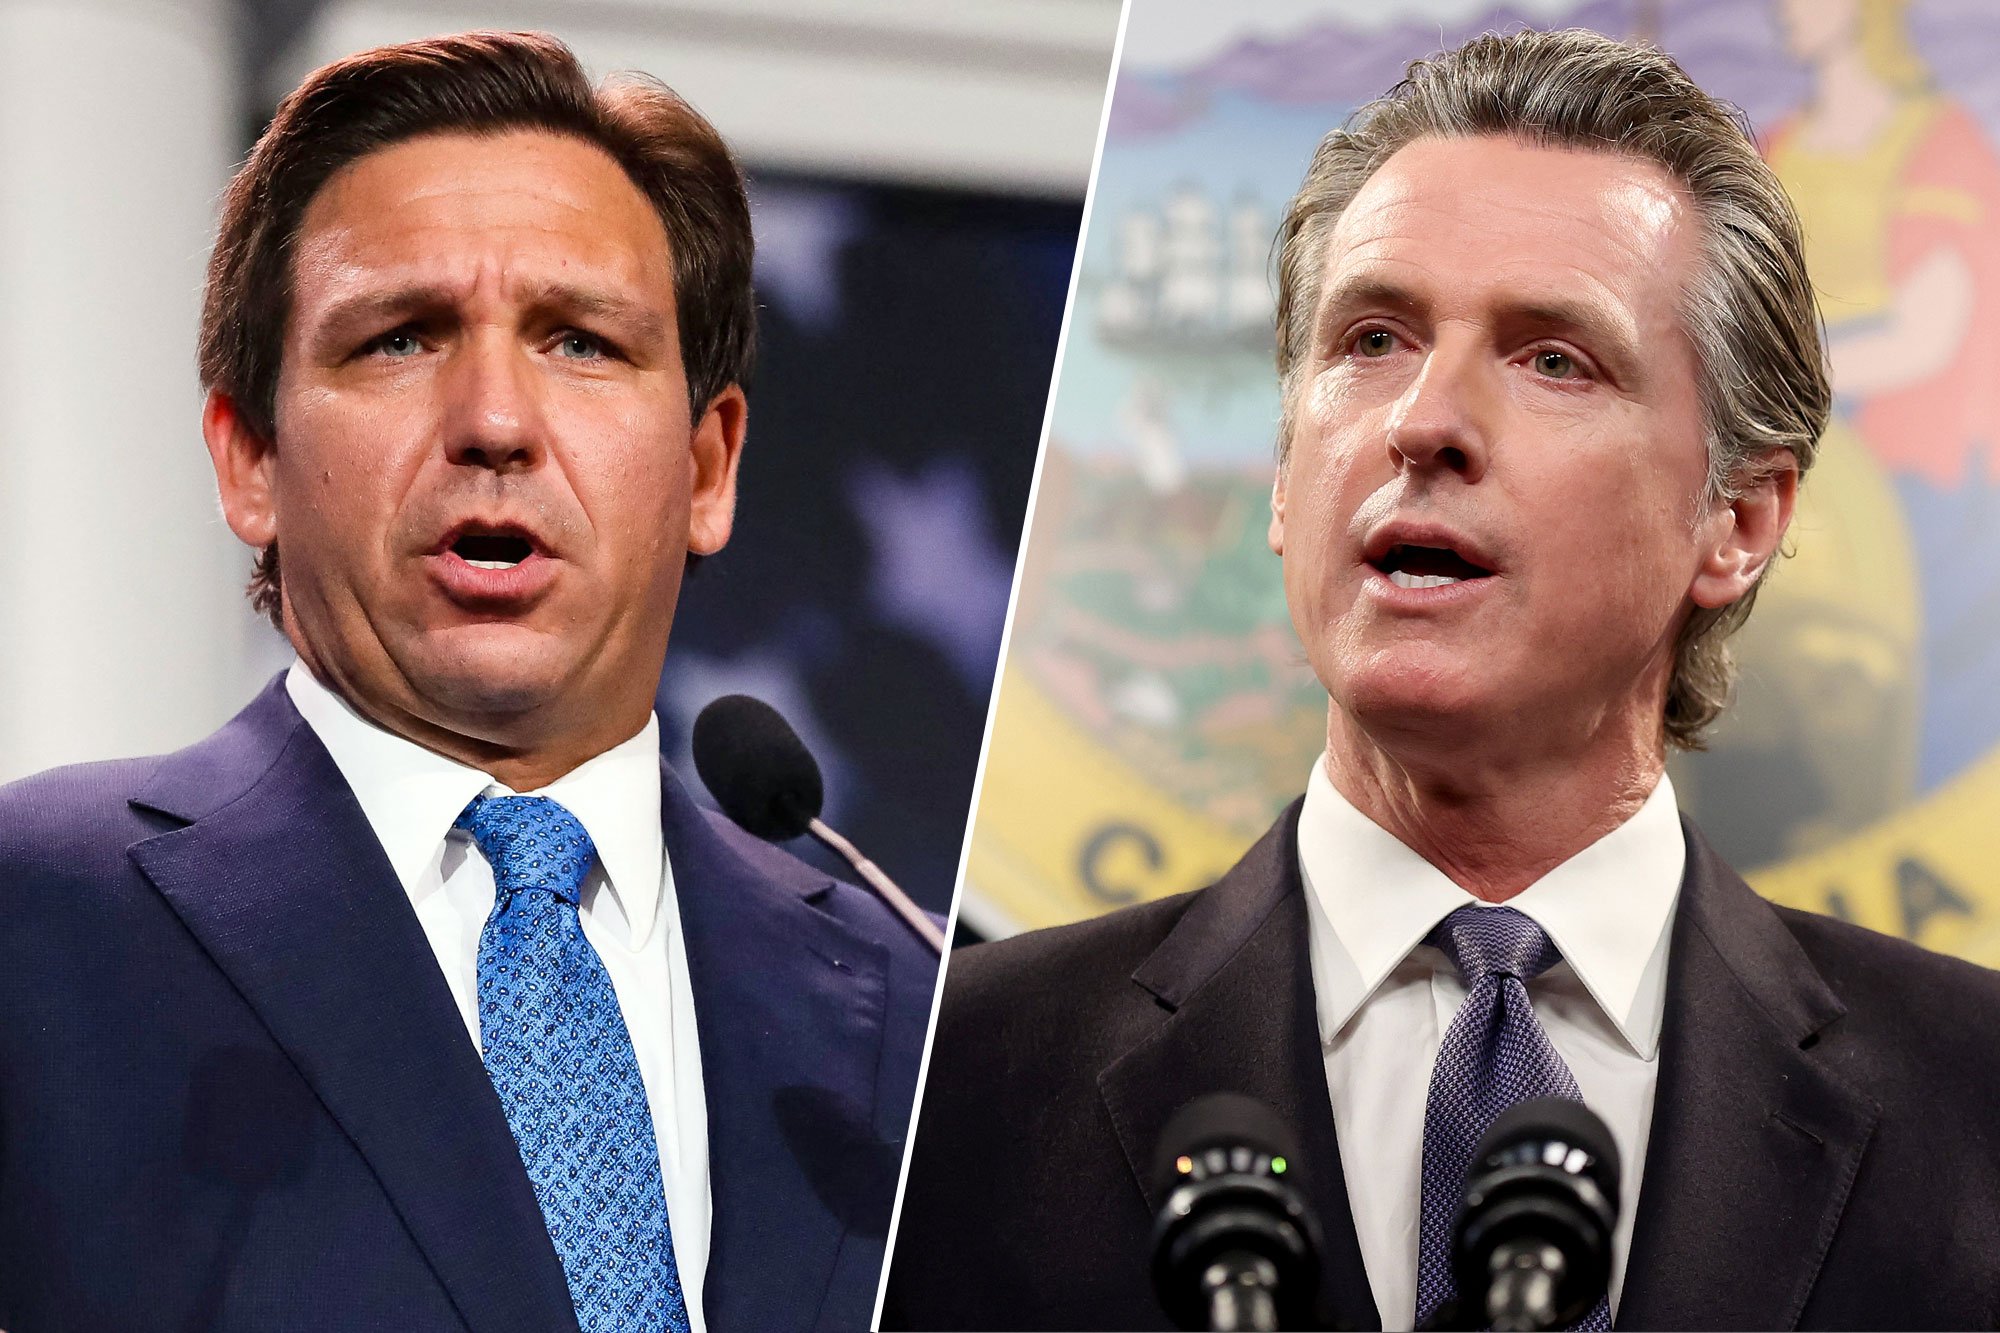 Newsom Claims DeSantis ‘Took the Bait’ By Agreeing To Debate Him: ‘Shows He’s Completely Unqualified To Be President’